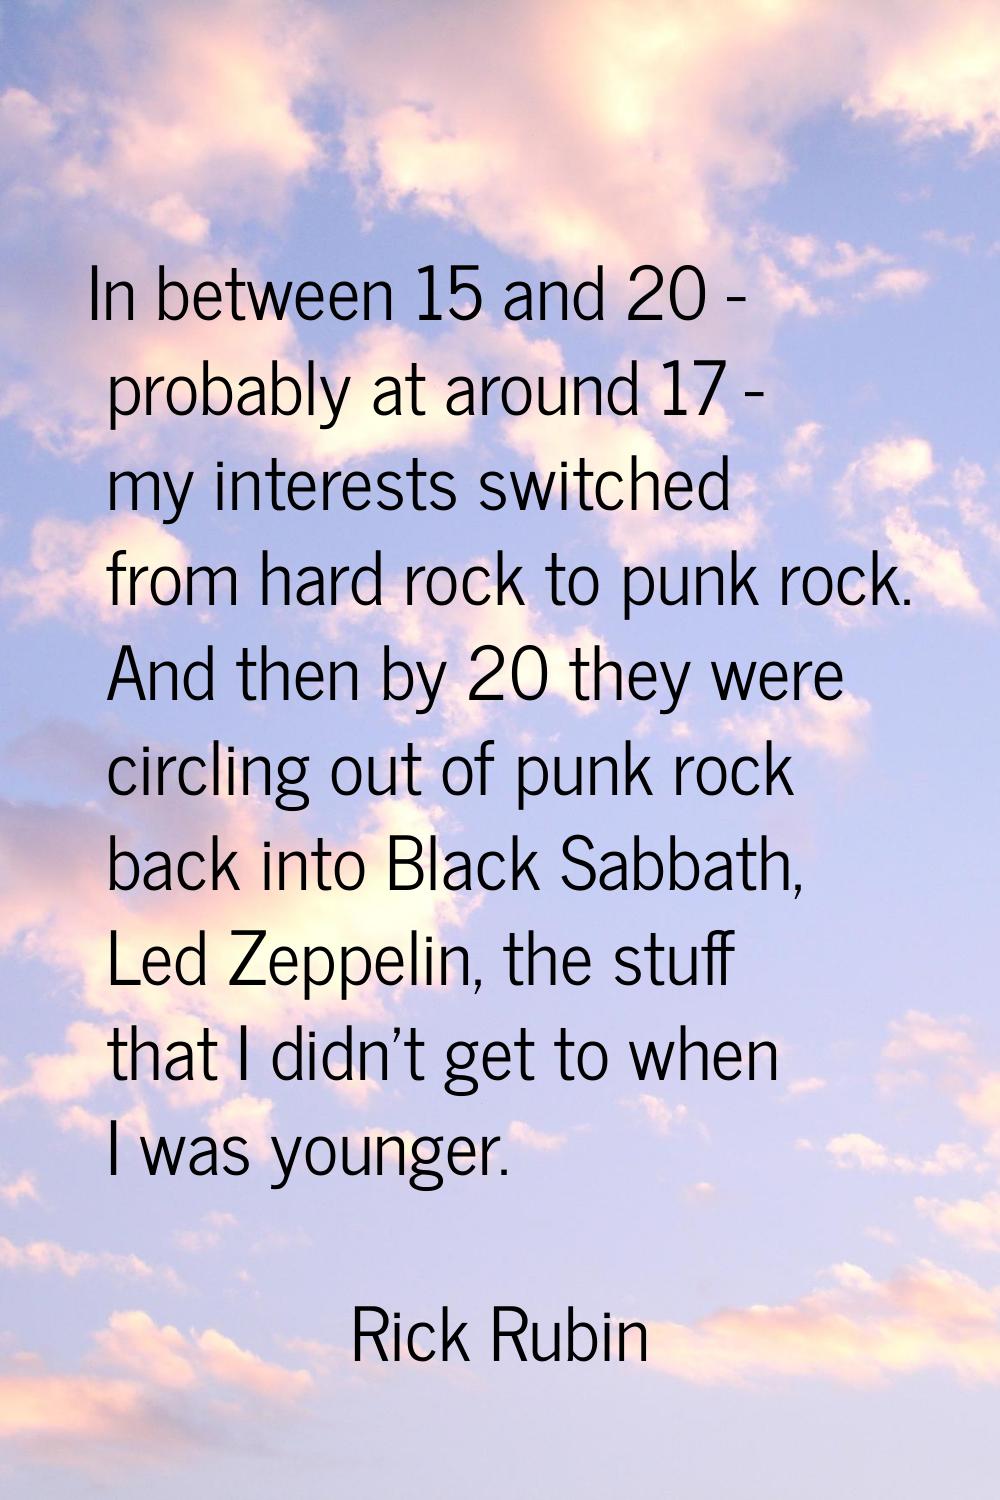 In between 15 and 20 - probably at around 17 - my interests switched from hard rock to punk rock. A